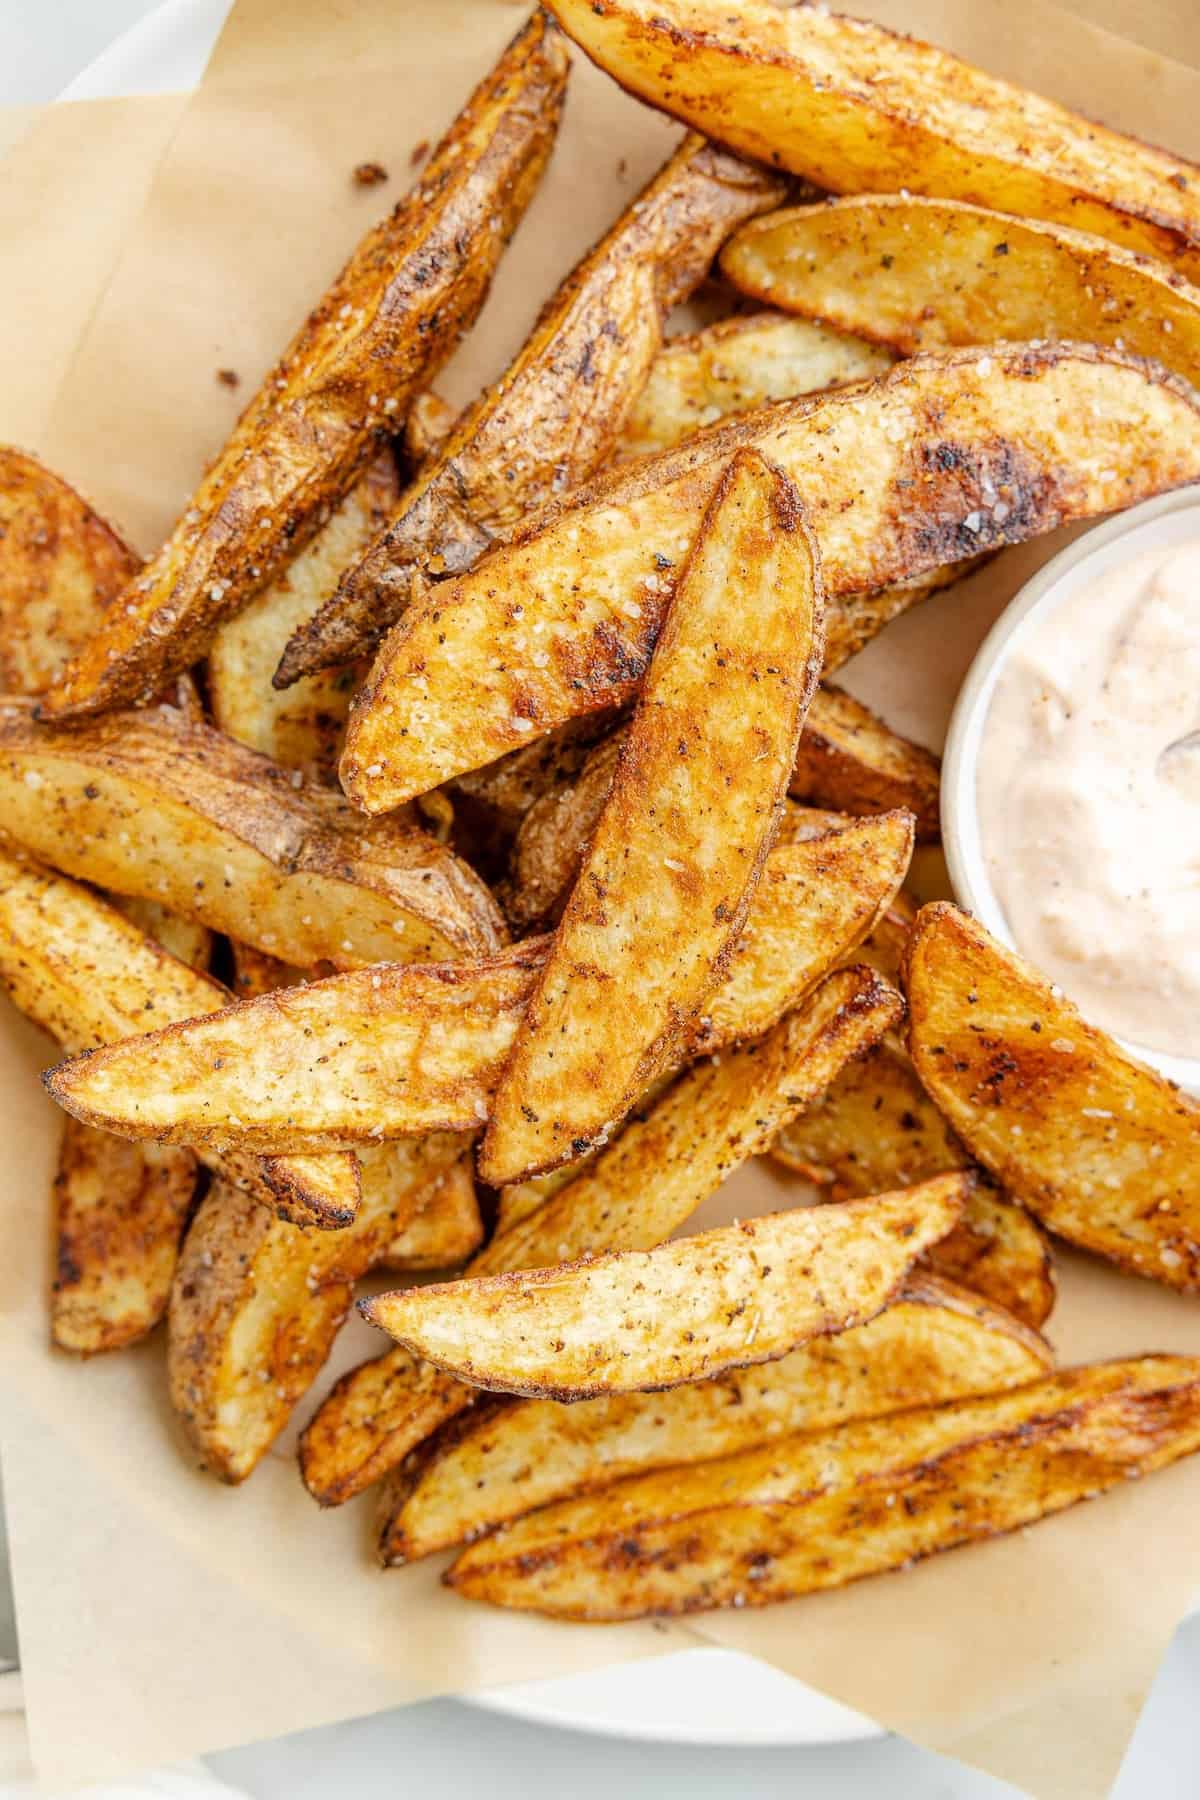 Potato wedges on a platter with a side of dipping sauce.